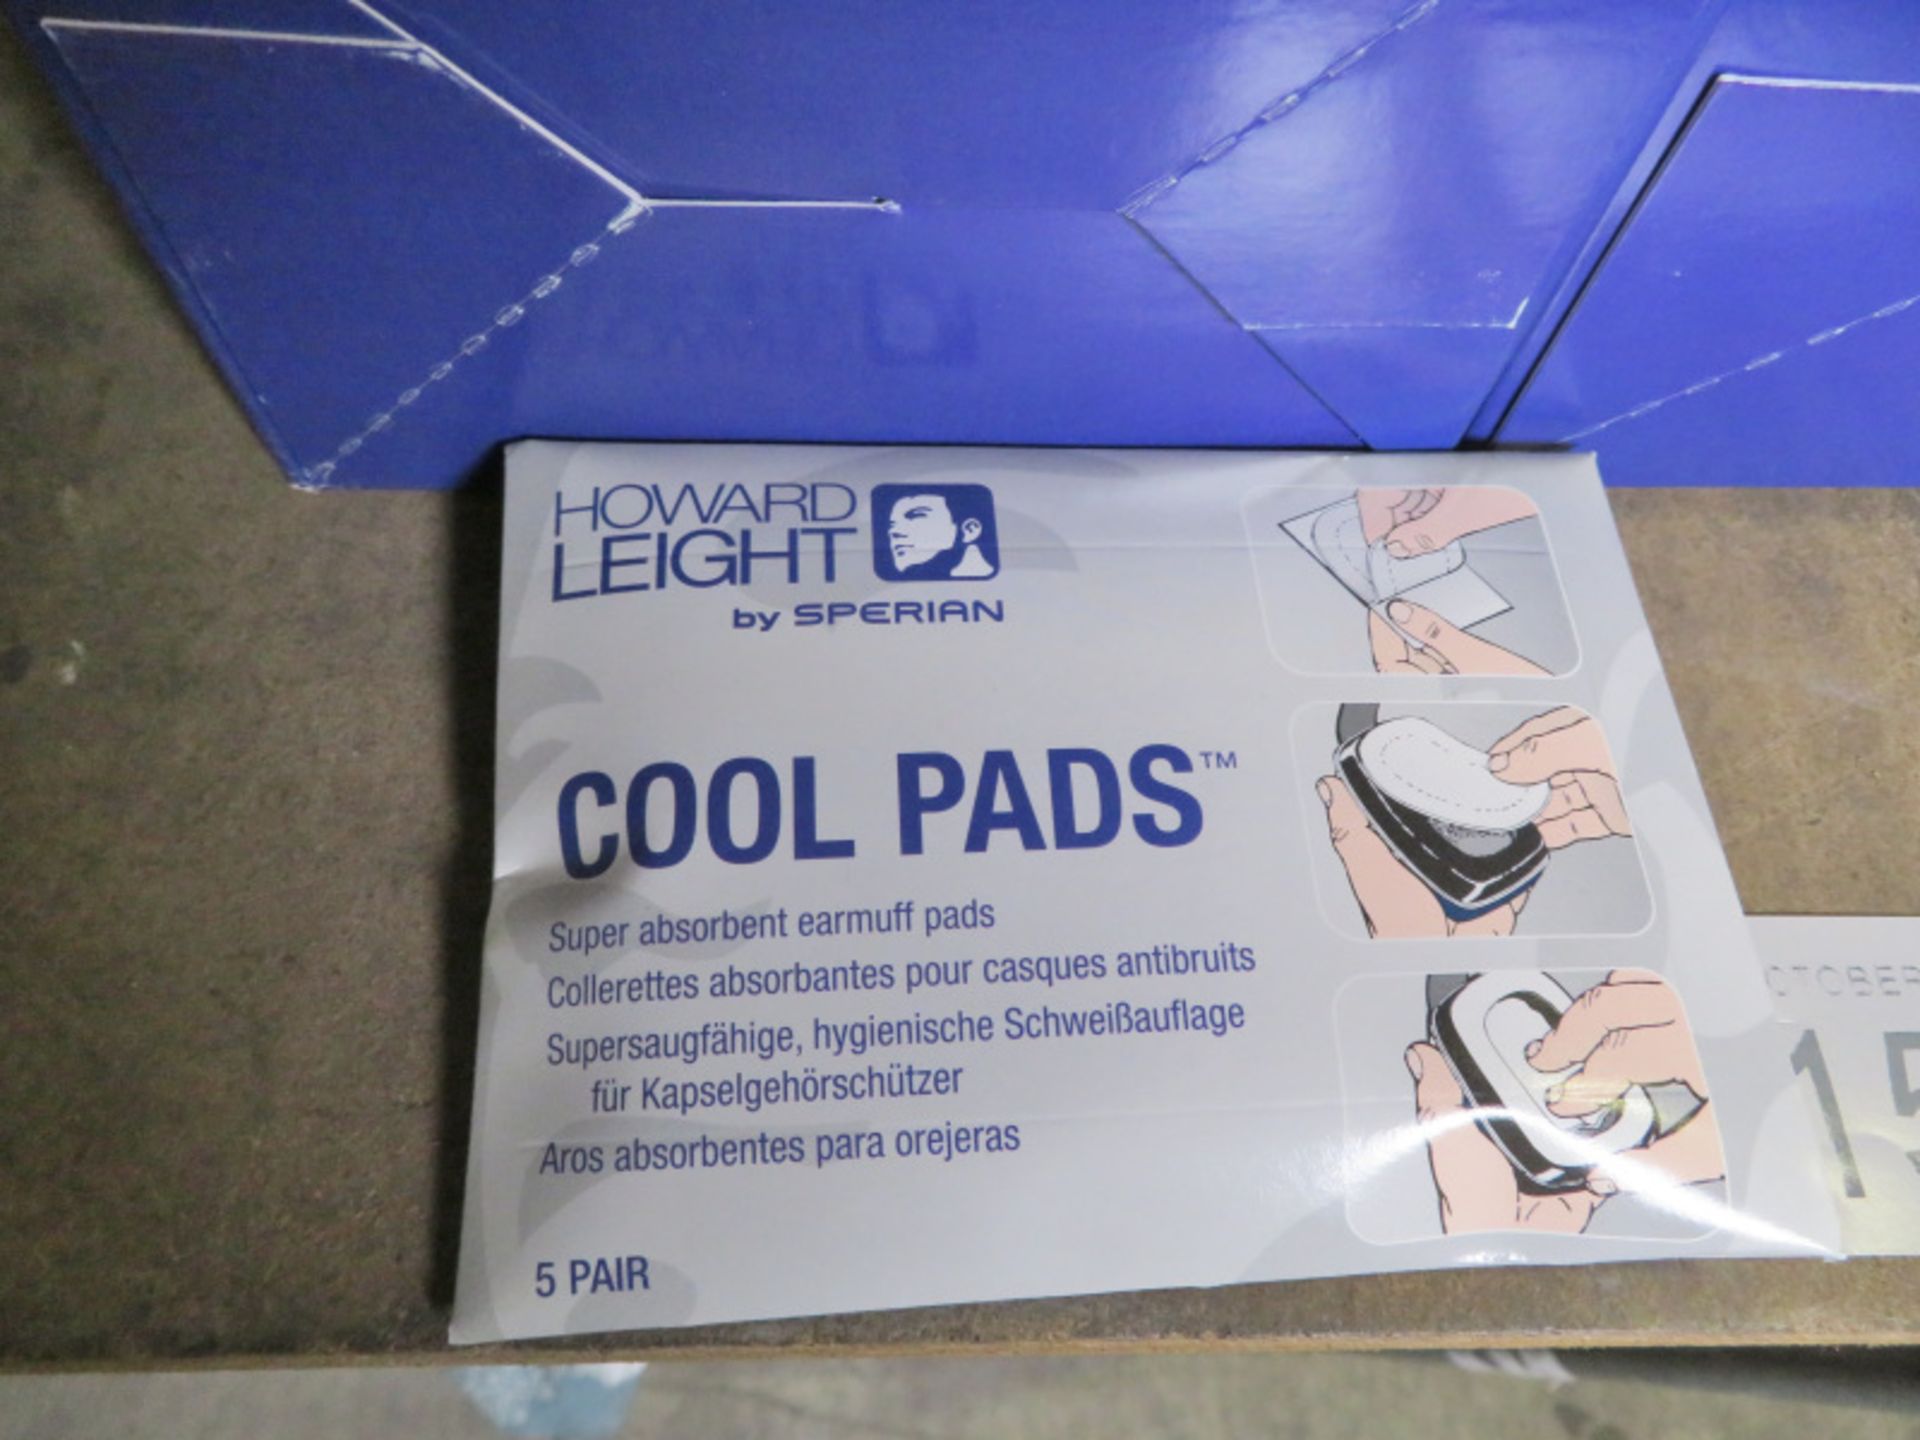 Howard Leight Coolpads - 6 boxes - 20 - 5 pair packs per box - Image 2 of 3